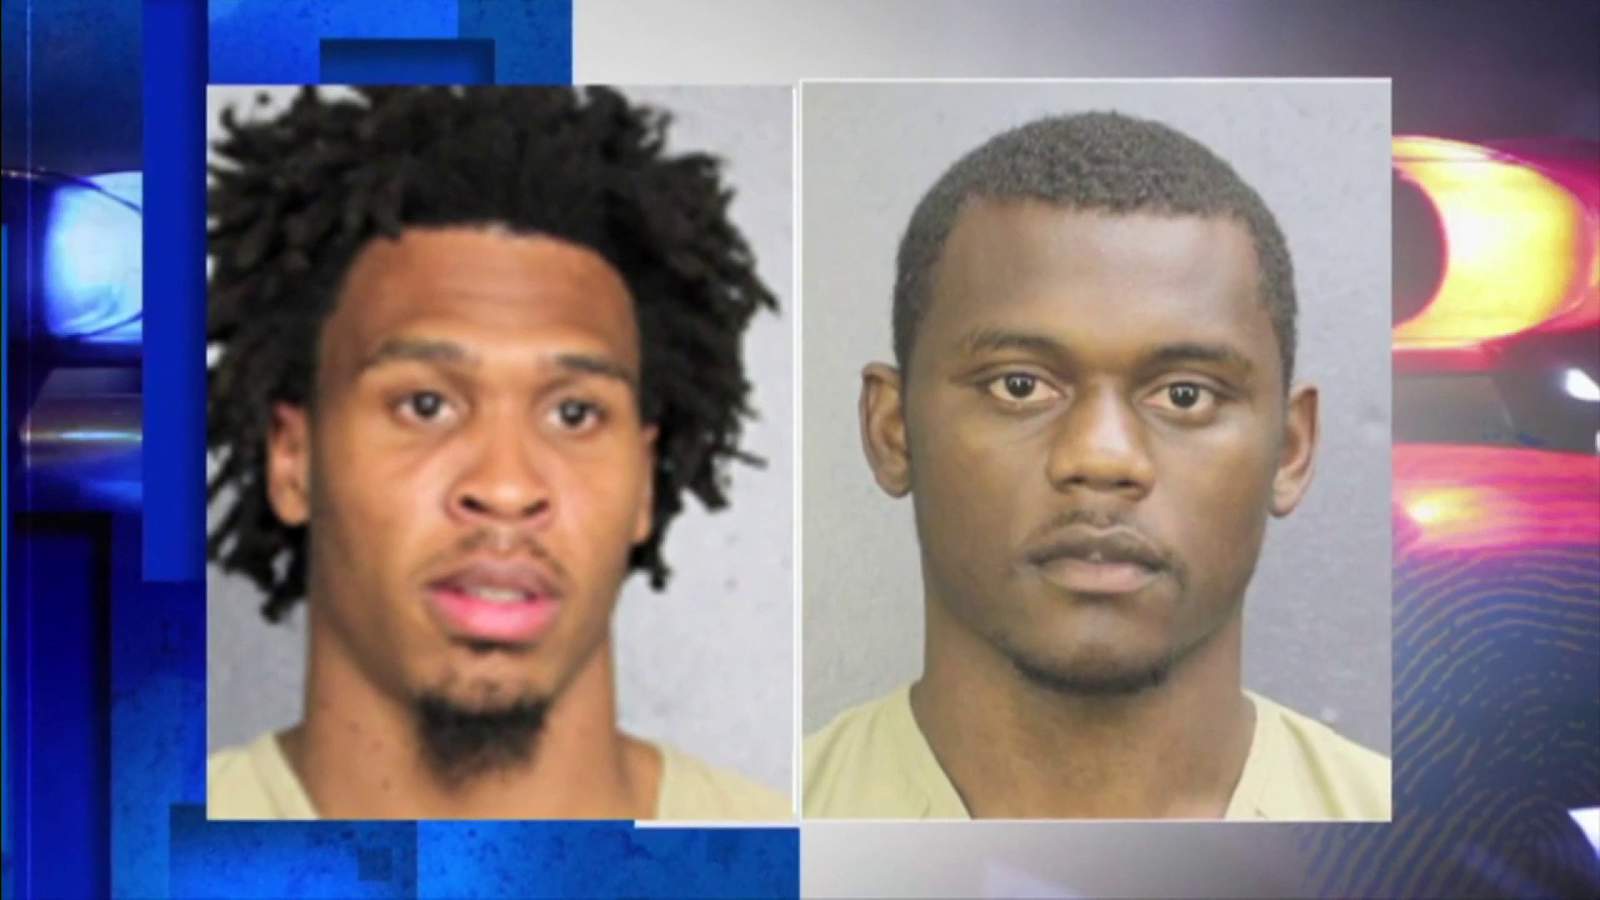 Judge grants bond to NFL players accused of armed robbery